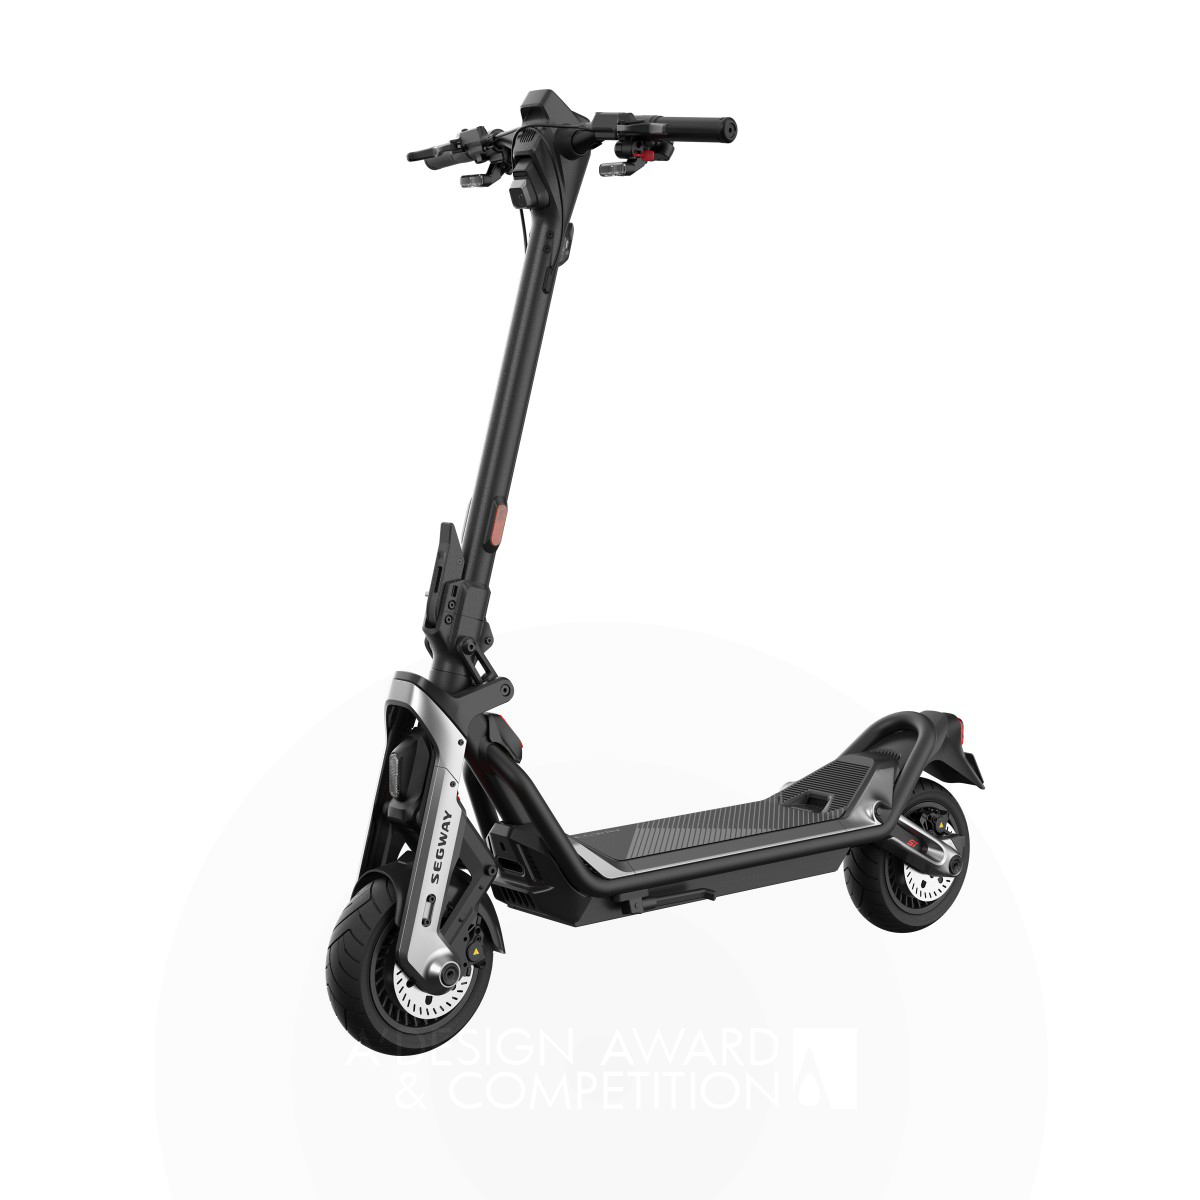 Yongjie Li wins Silver at the prestigious A' Scooter Design Award with Segway ST Electric Kickscooter.